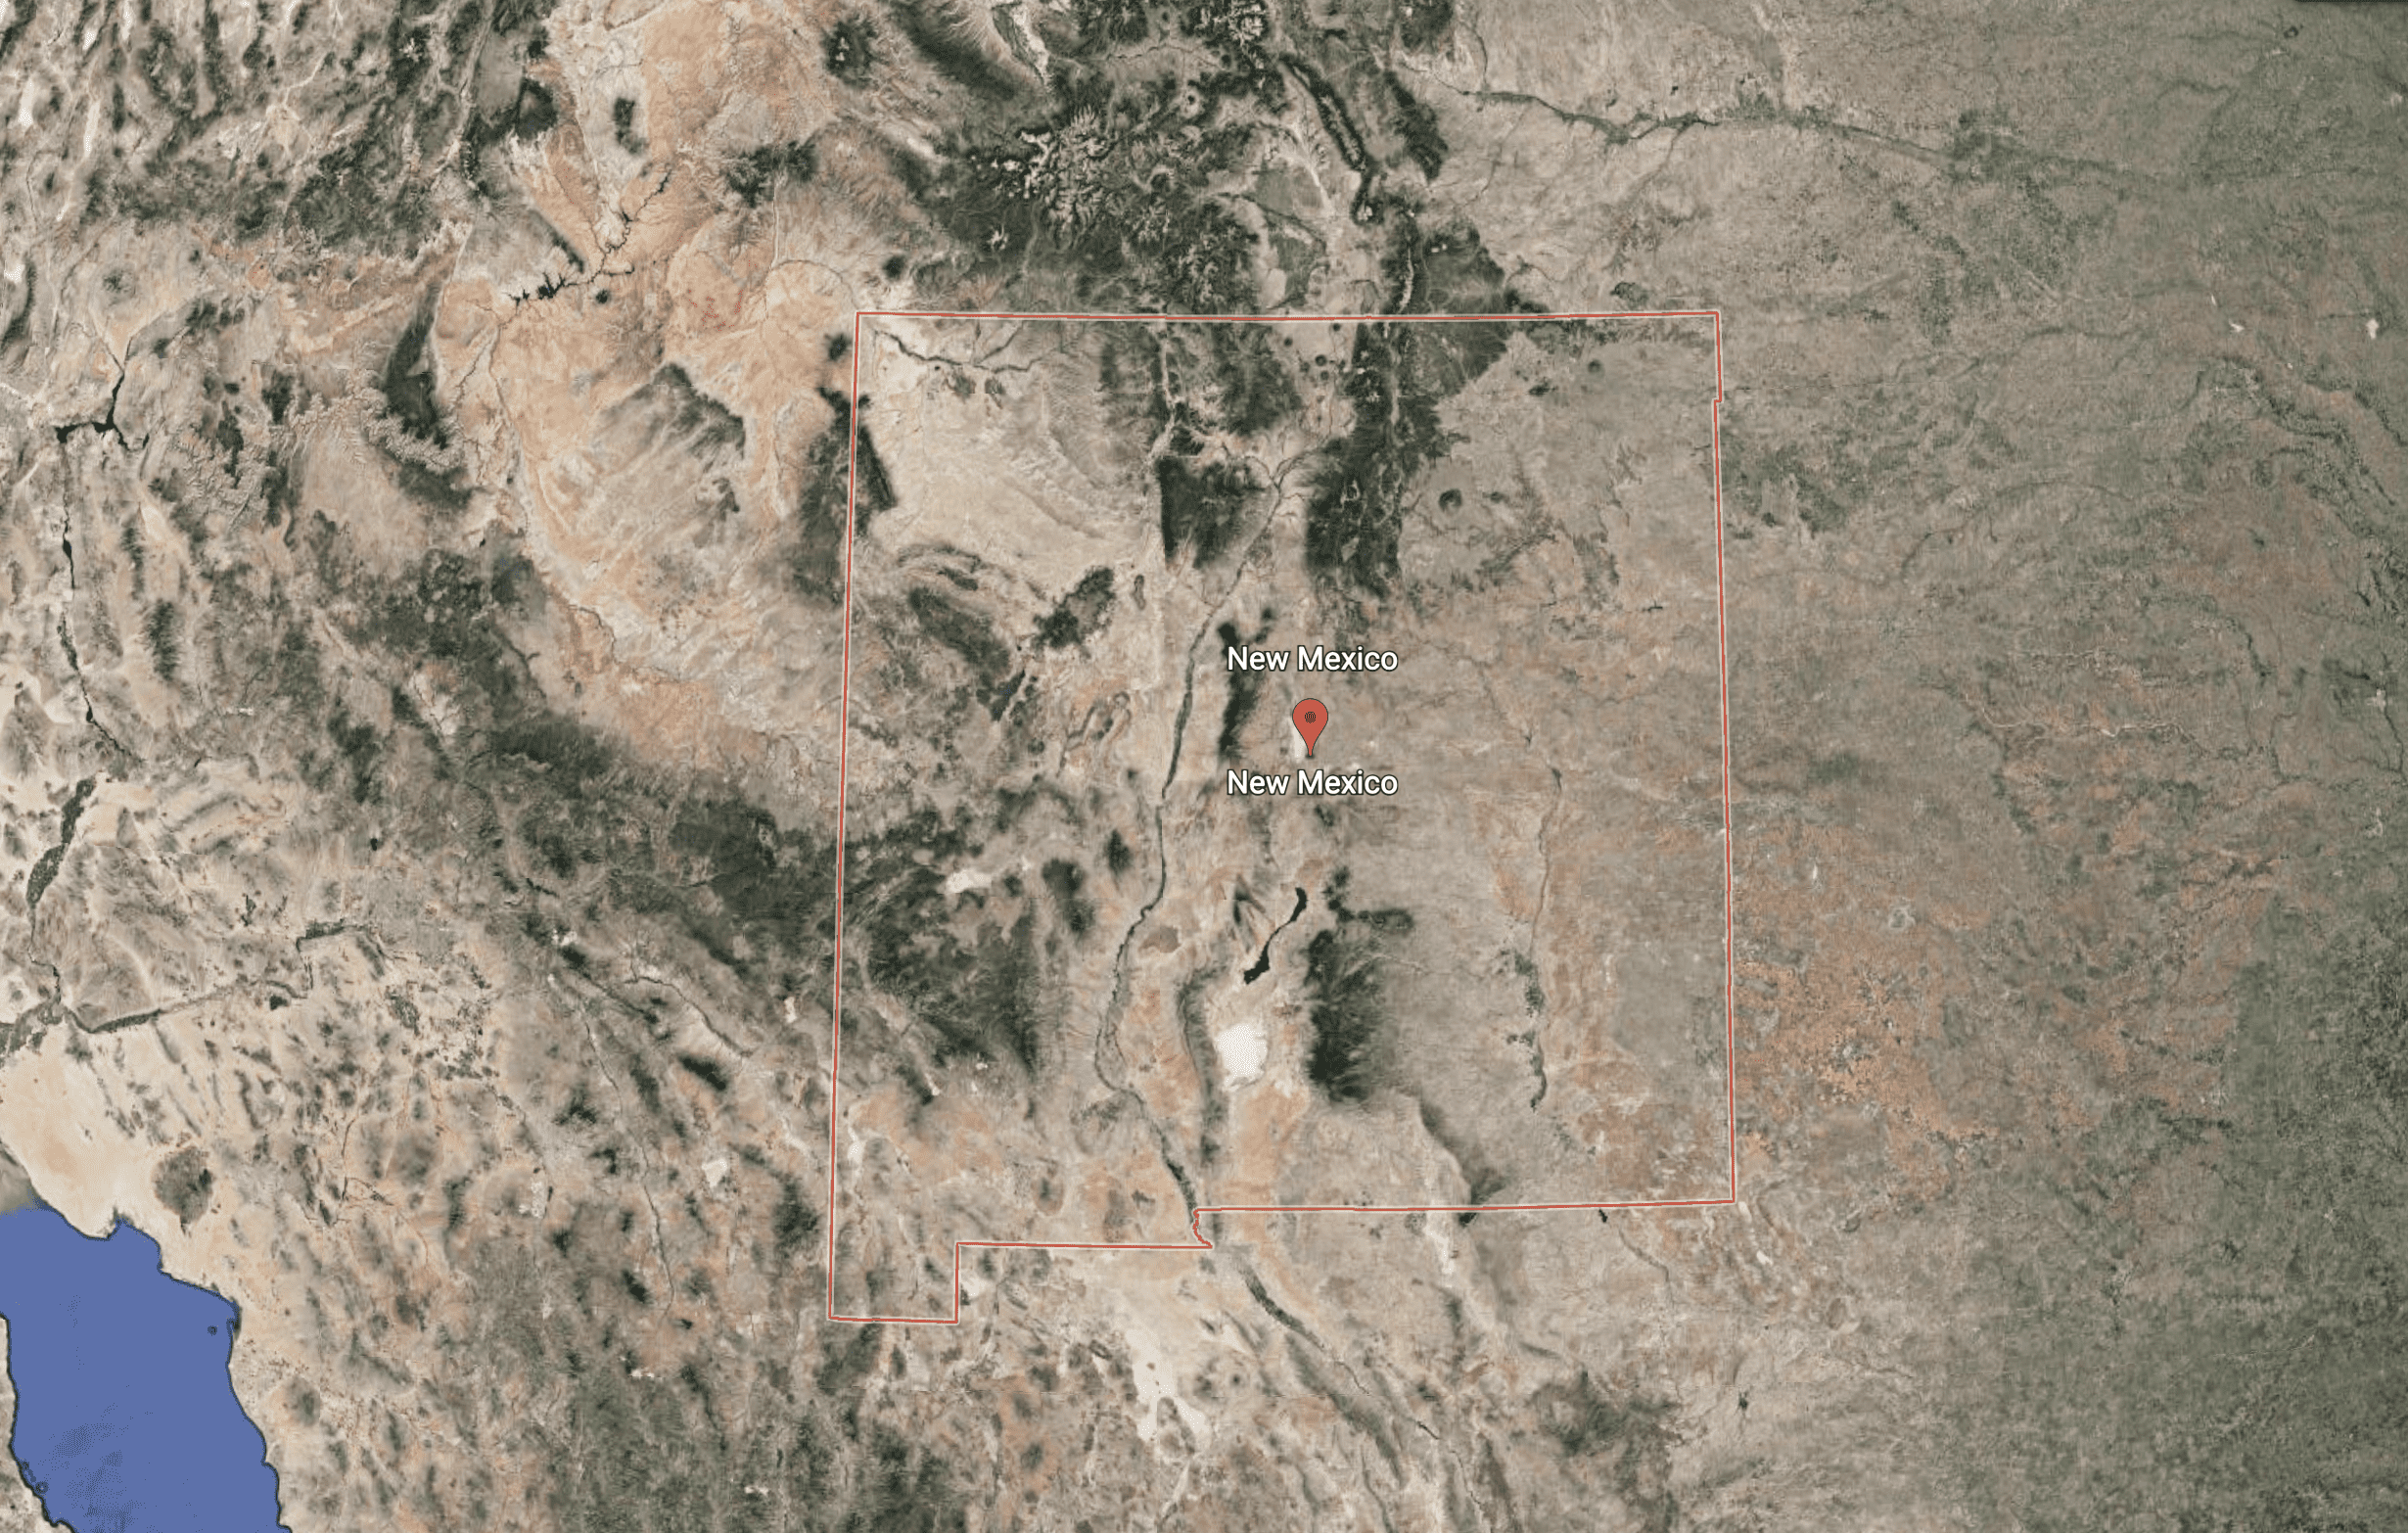 Satellite overhead image of New Mexico from Google Earth 2022